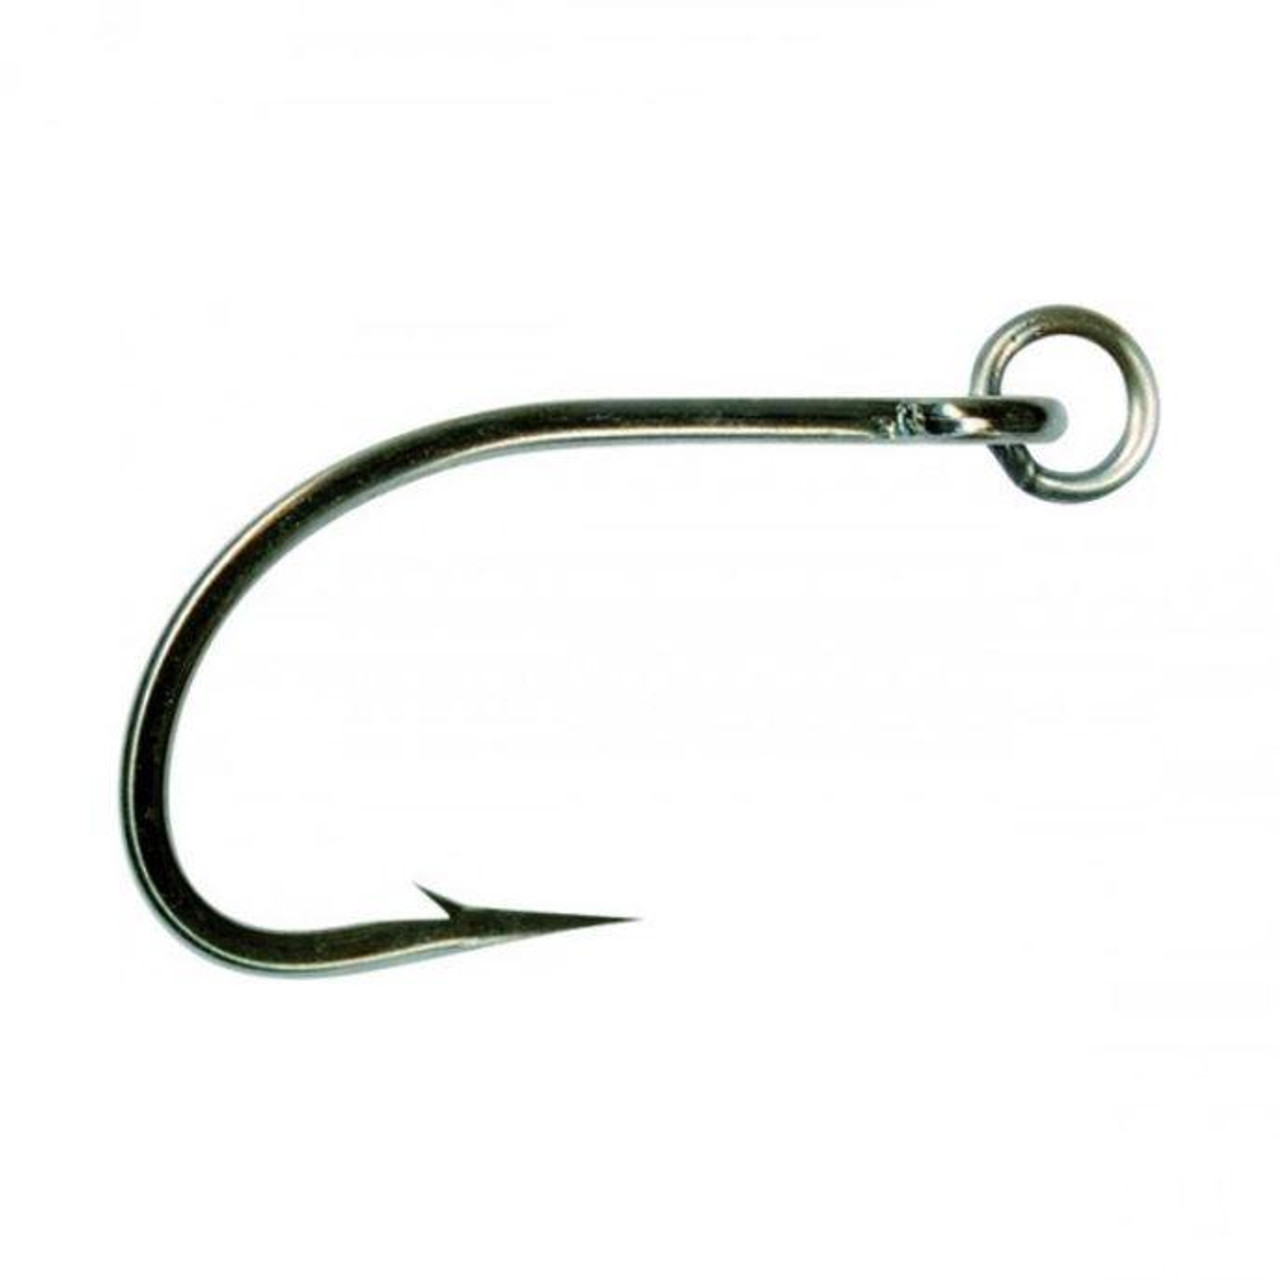 Mustad O'Shaughnessy Live Bait Hook with Action Ring